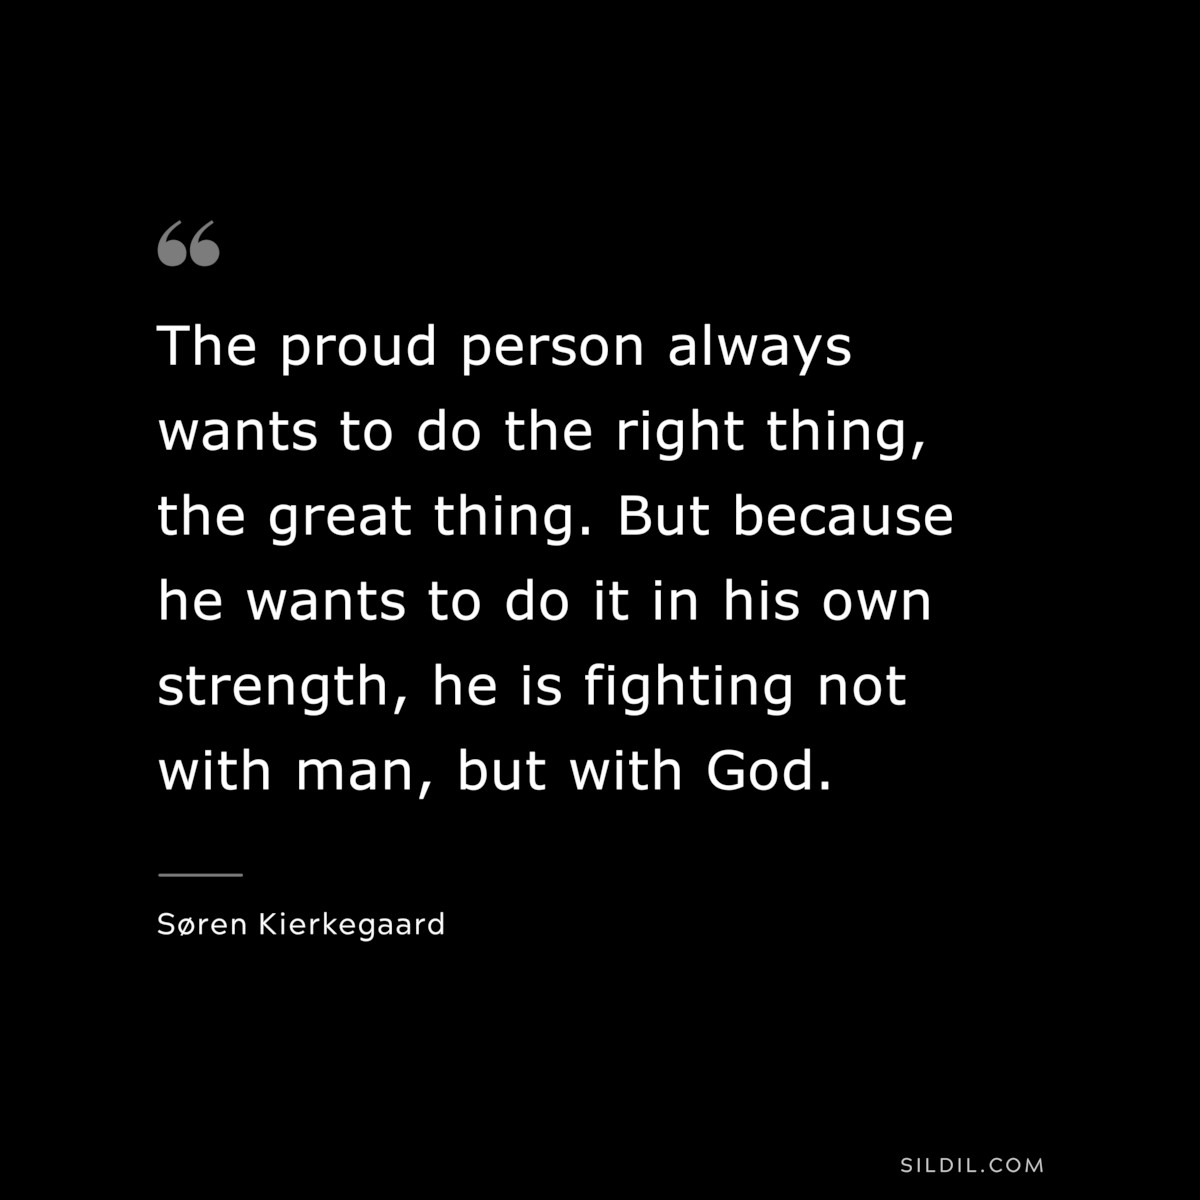 The proud person always wants to do the right thing, the great thing. But because he wants to do it in his own strength, he is fighting not with man, but with God. ― Søren Kierkegaard